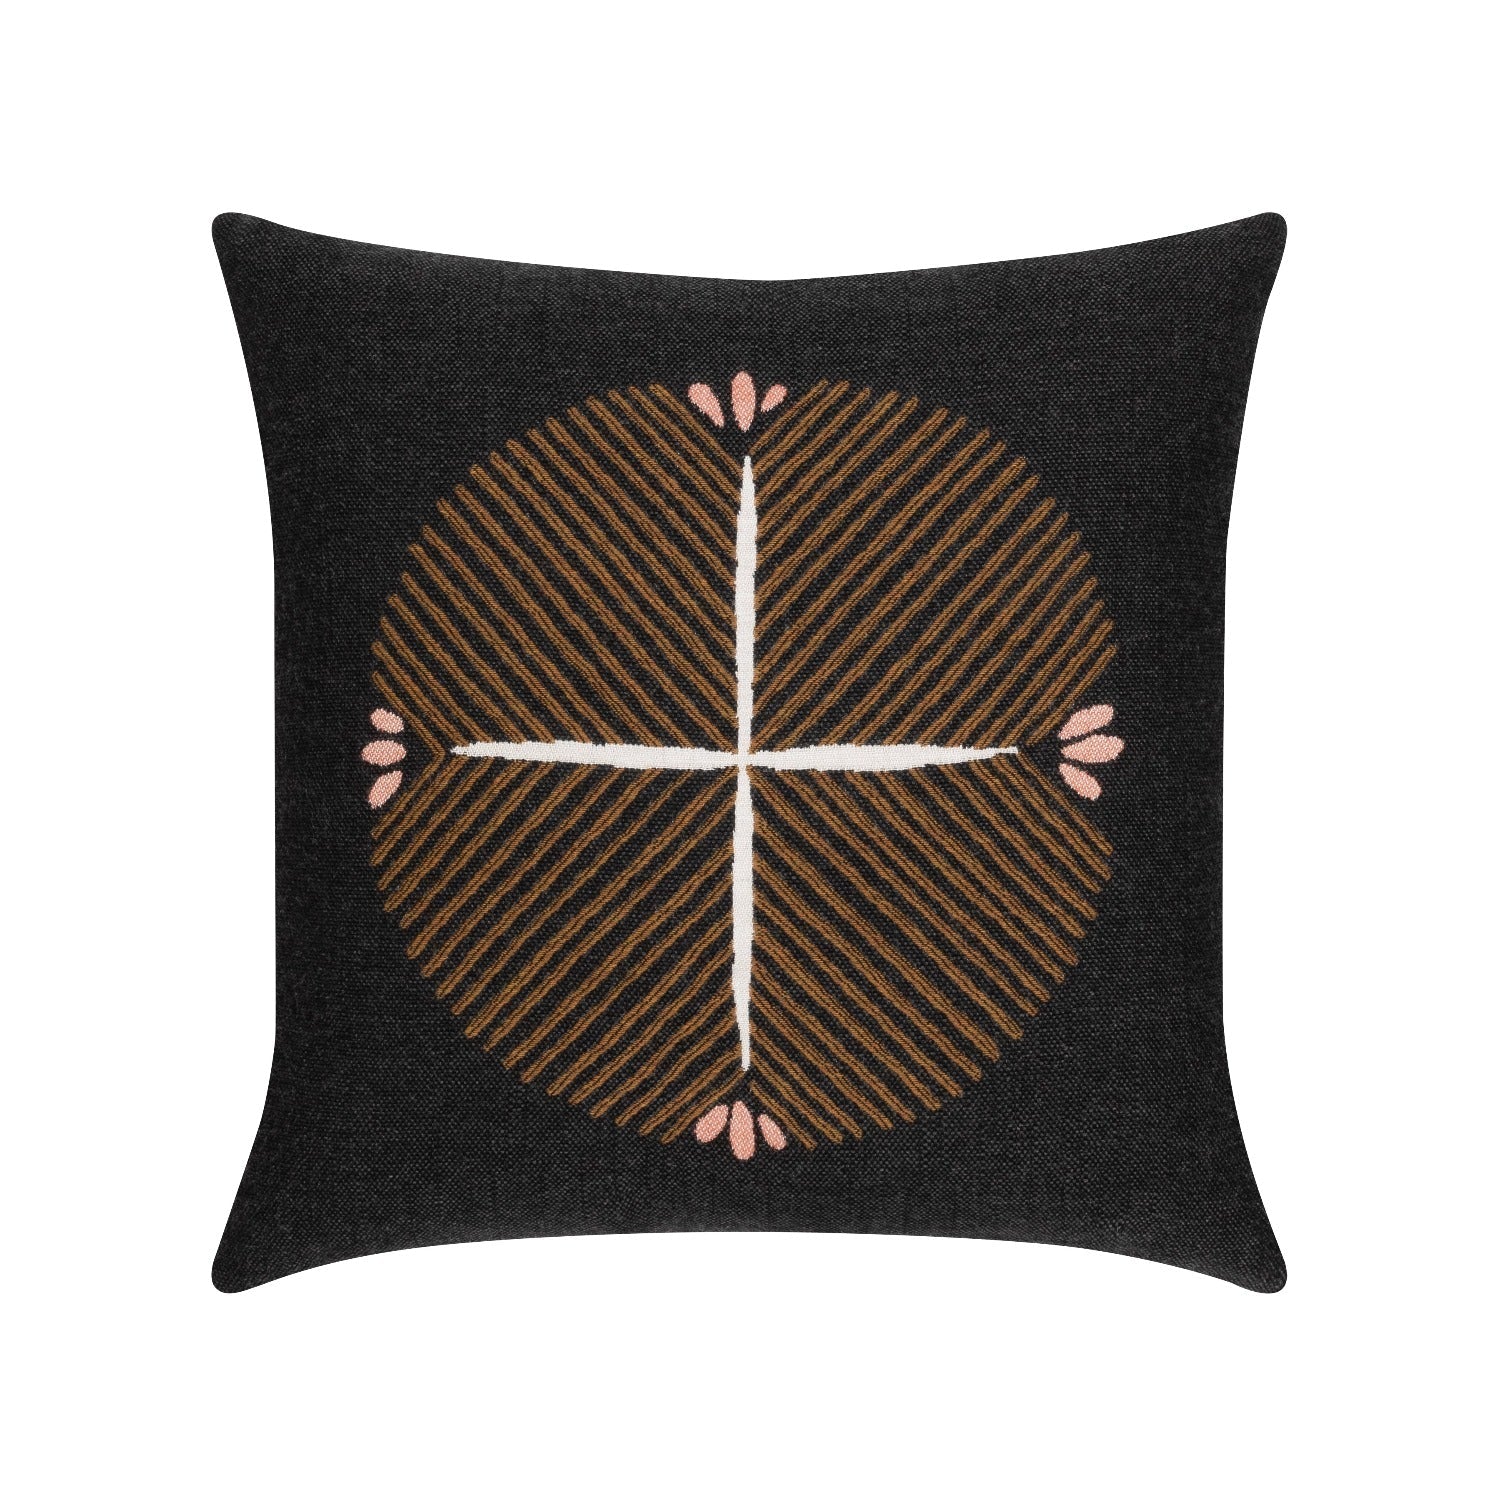 Elaine Smith Direction Earth 20 inch Square Pillow Throw Pillows 12041454